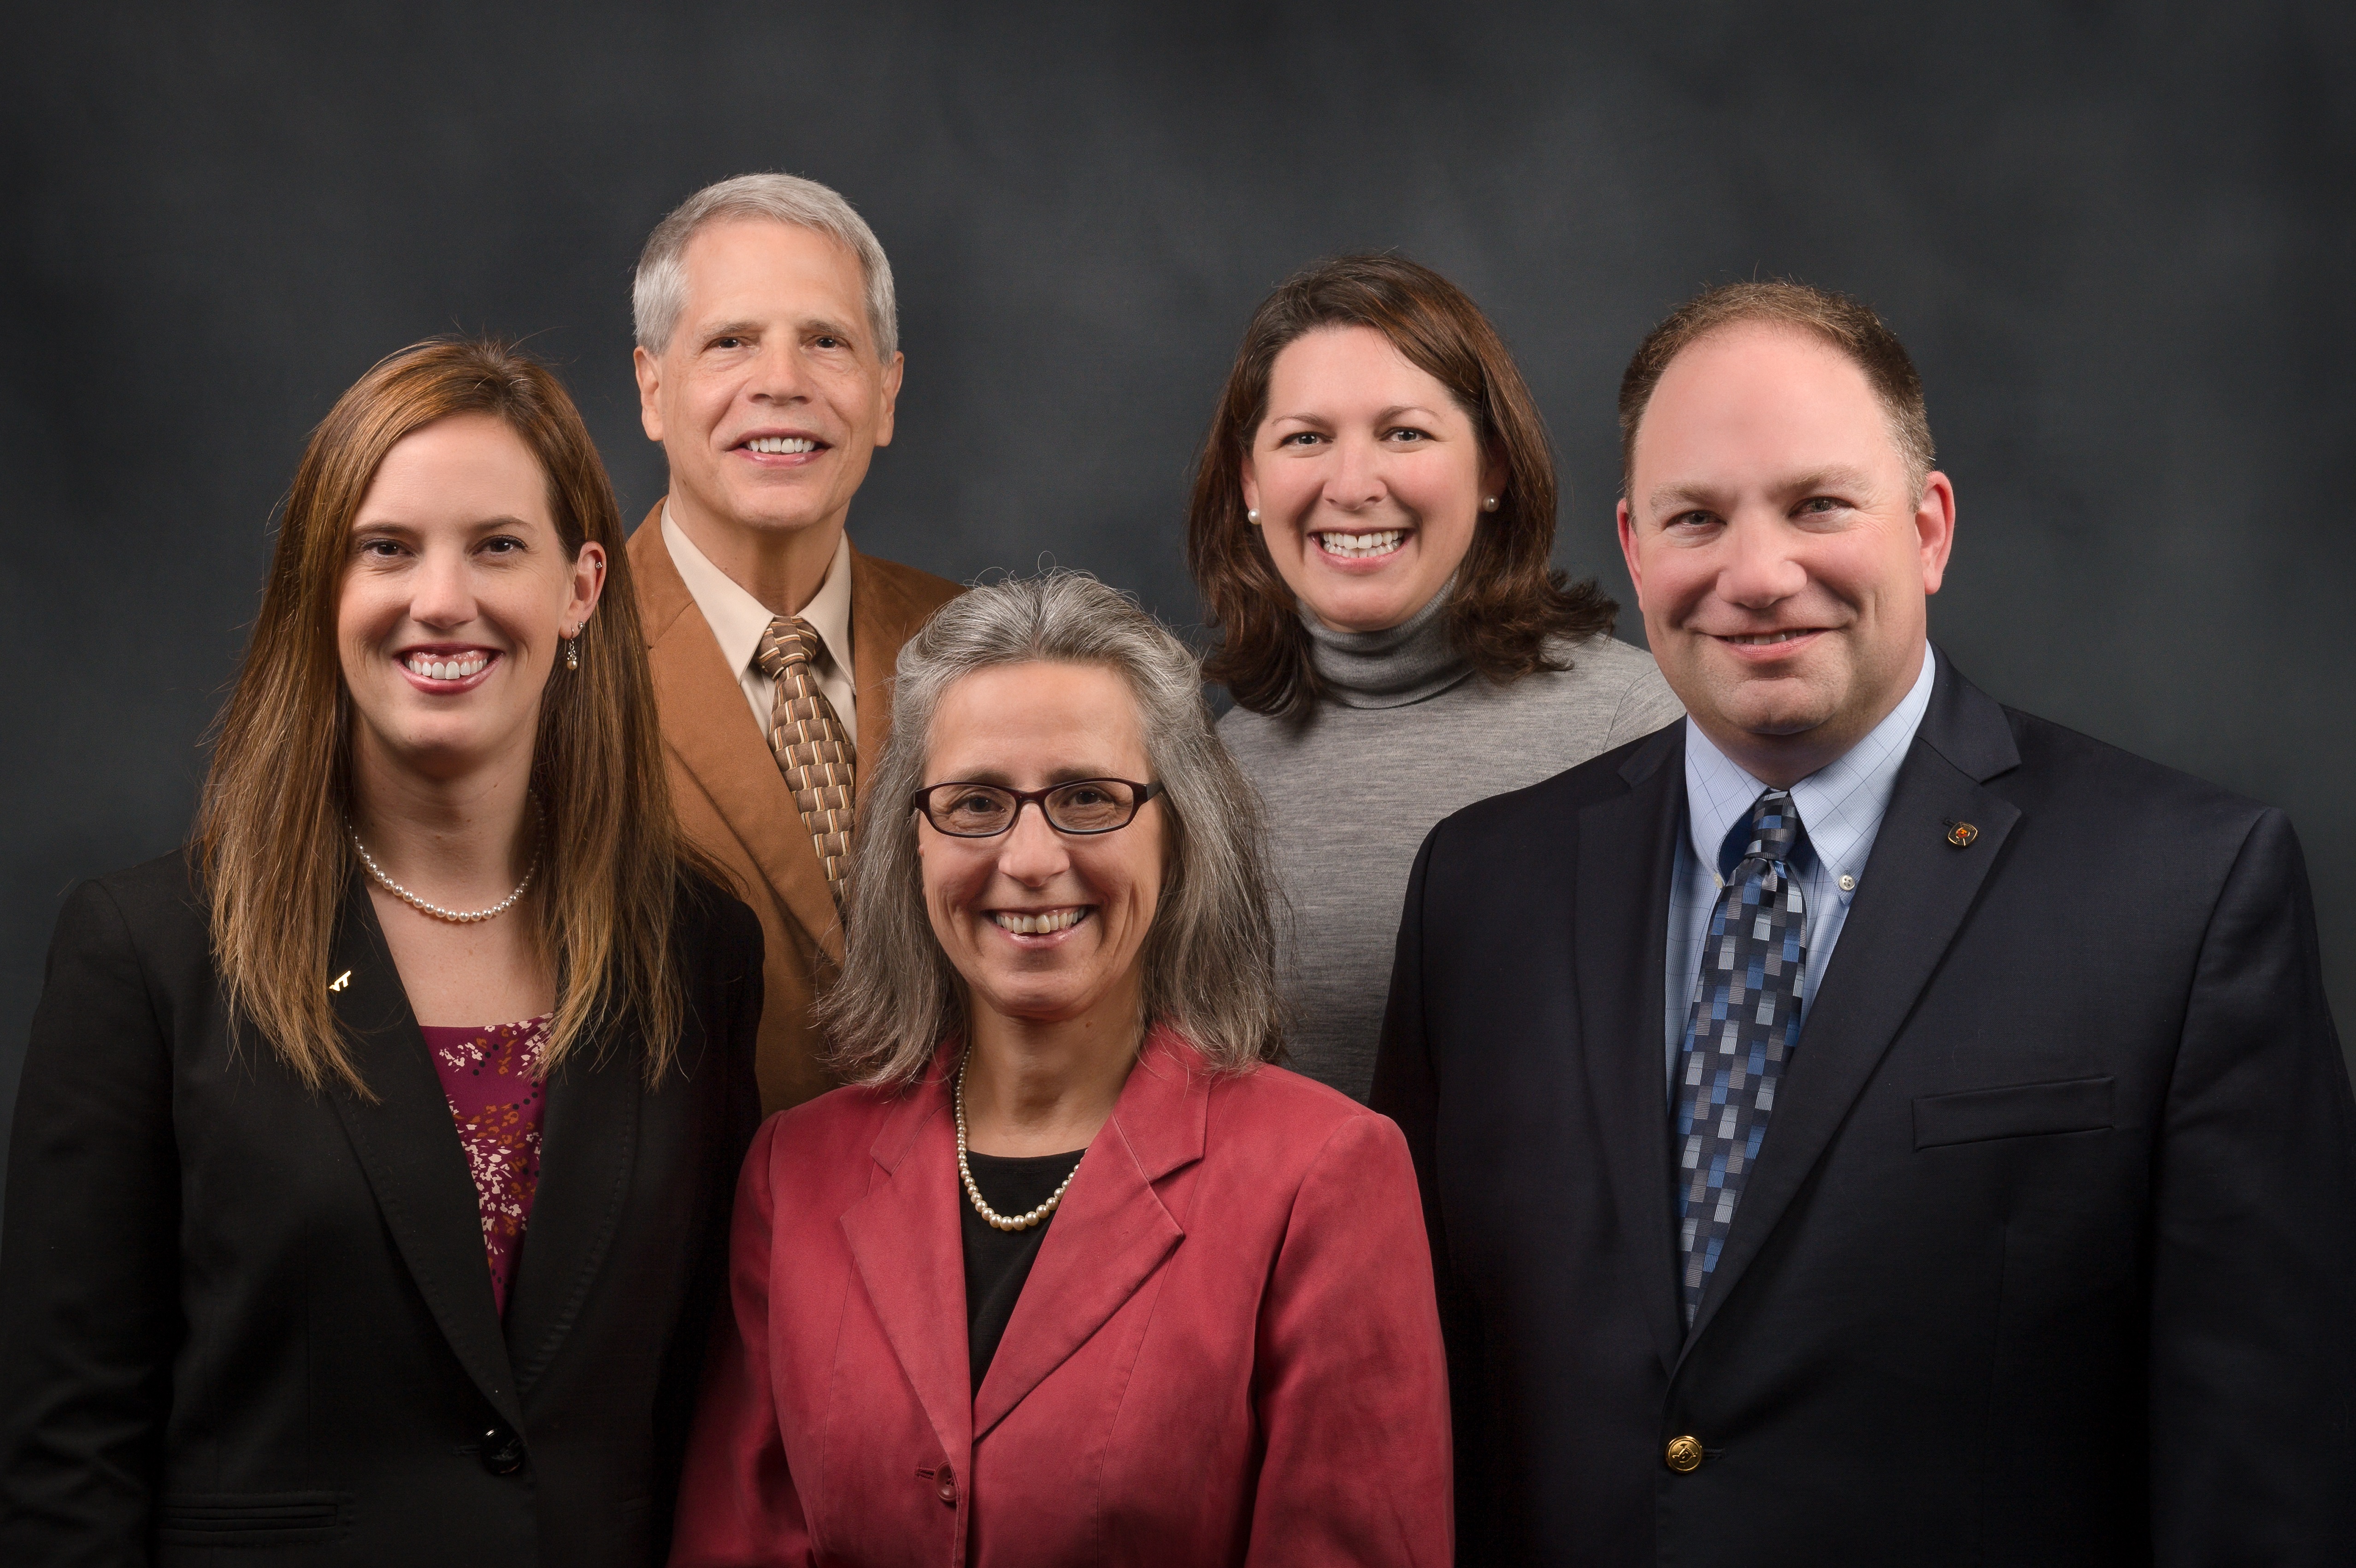 From left to right: Laura Farmer, Fred Piercy, Nancy Brossoie, Laura Welfare, and Gerard Lawson